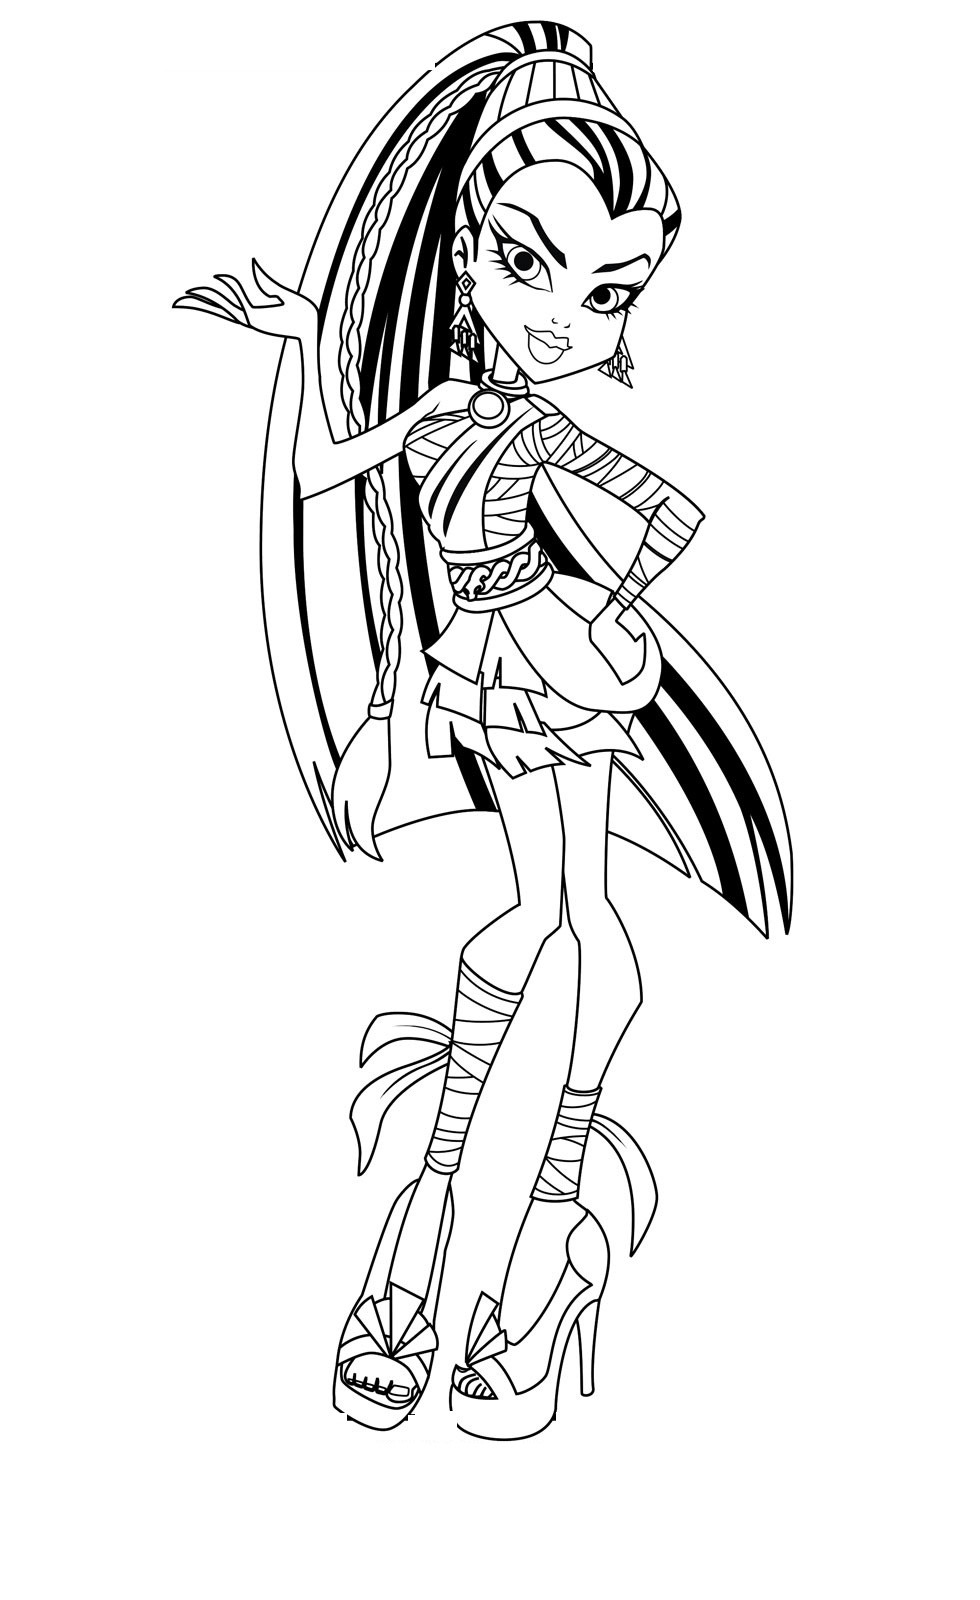 Coloring Pages For Girls Monster High Printable
 Free Printable Monster High Coloring Pages for Kids